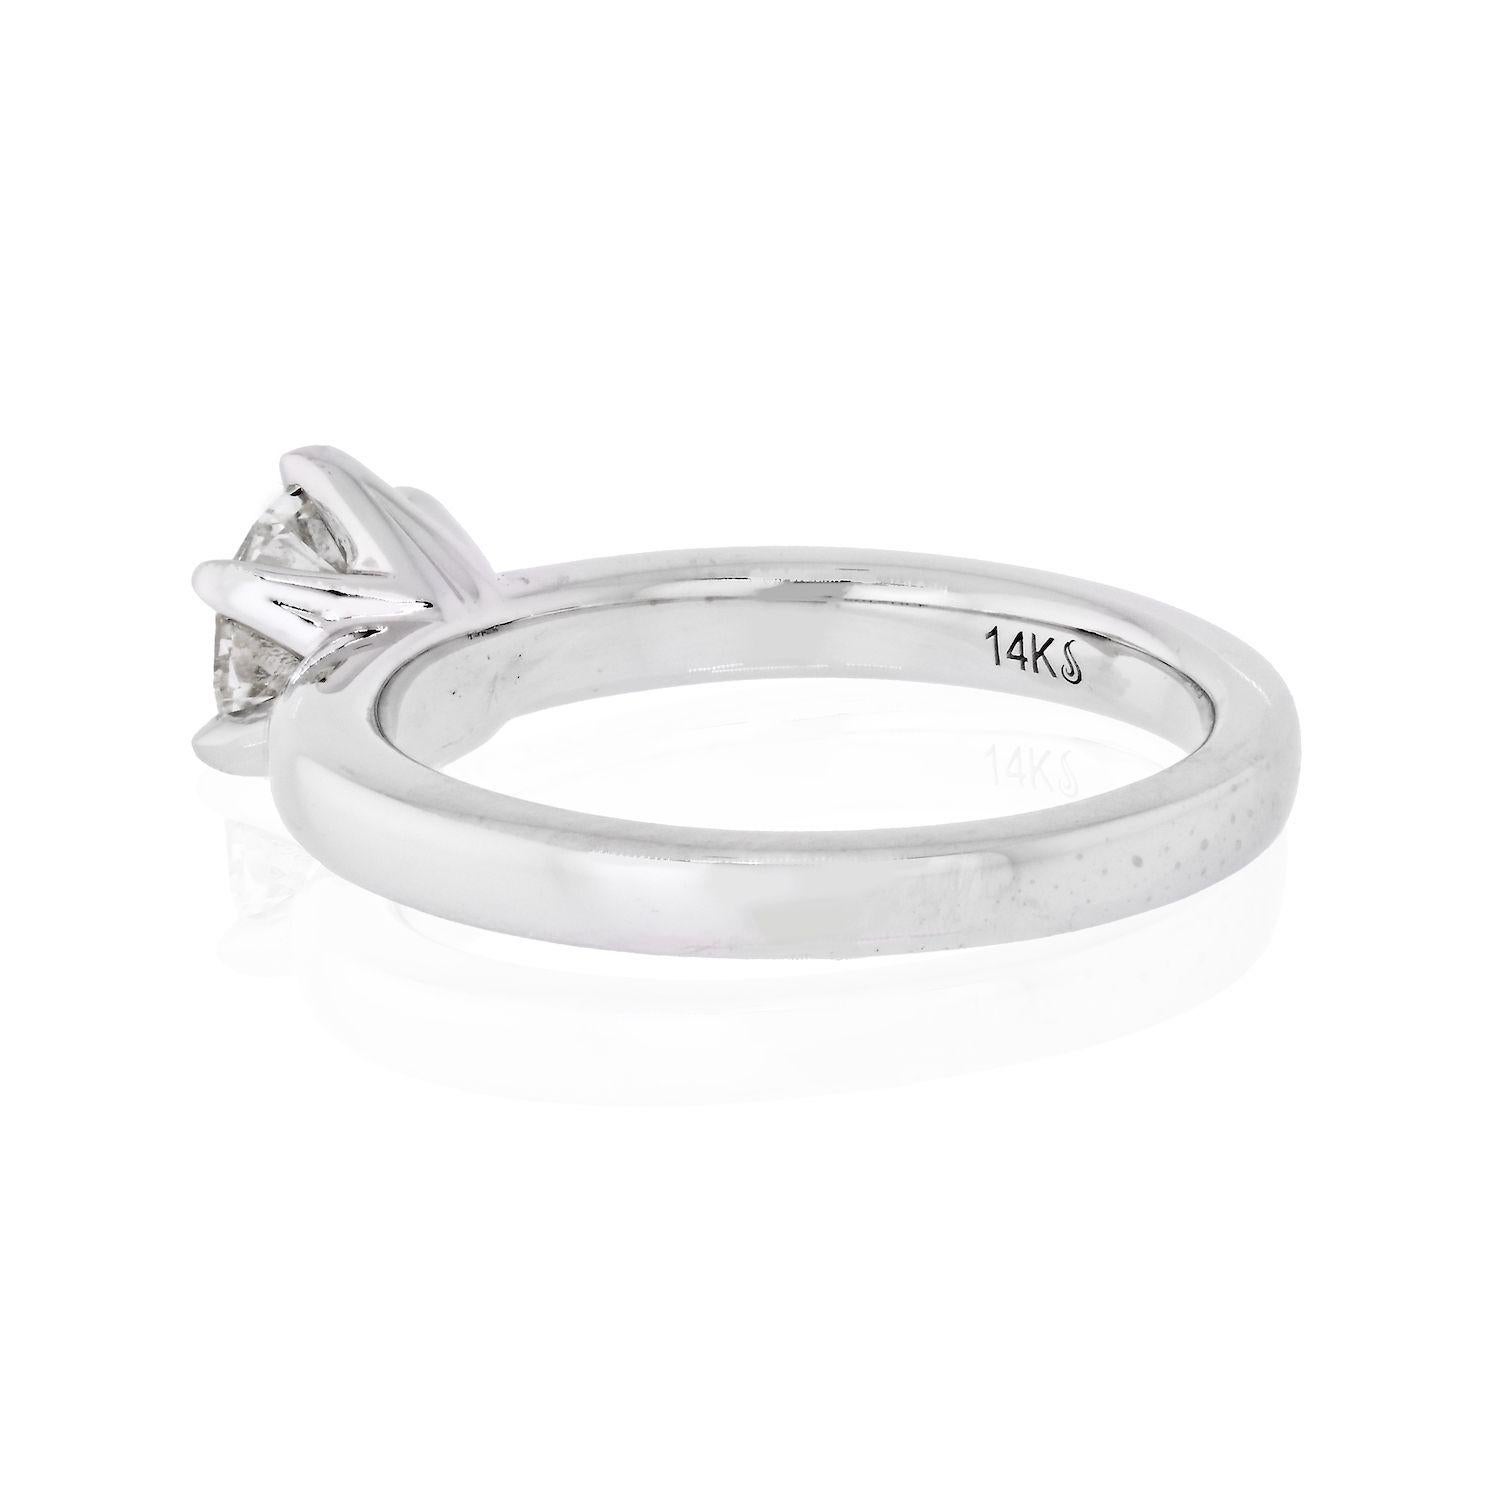 This solitaire style engagement ring is the perfect marriage of modern and vintage. It features a 1.33 carat Old European Cut diamond in a modern 14 karat, 2.5mm wide white gold setting. The diamond, has J color and SI1 clarity certified by GIA and